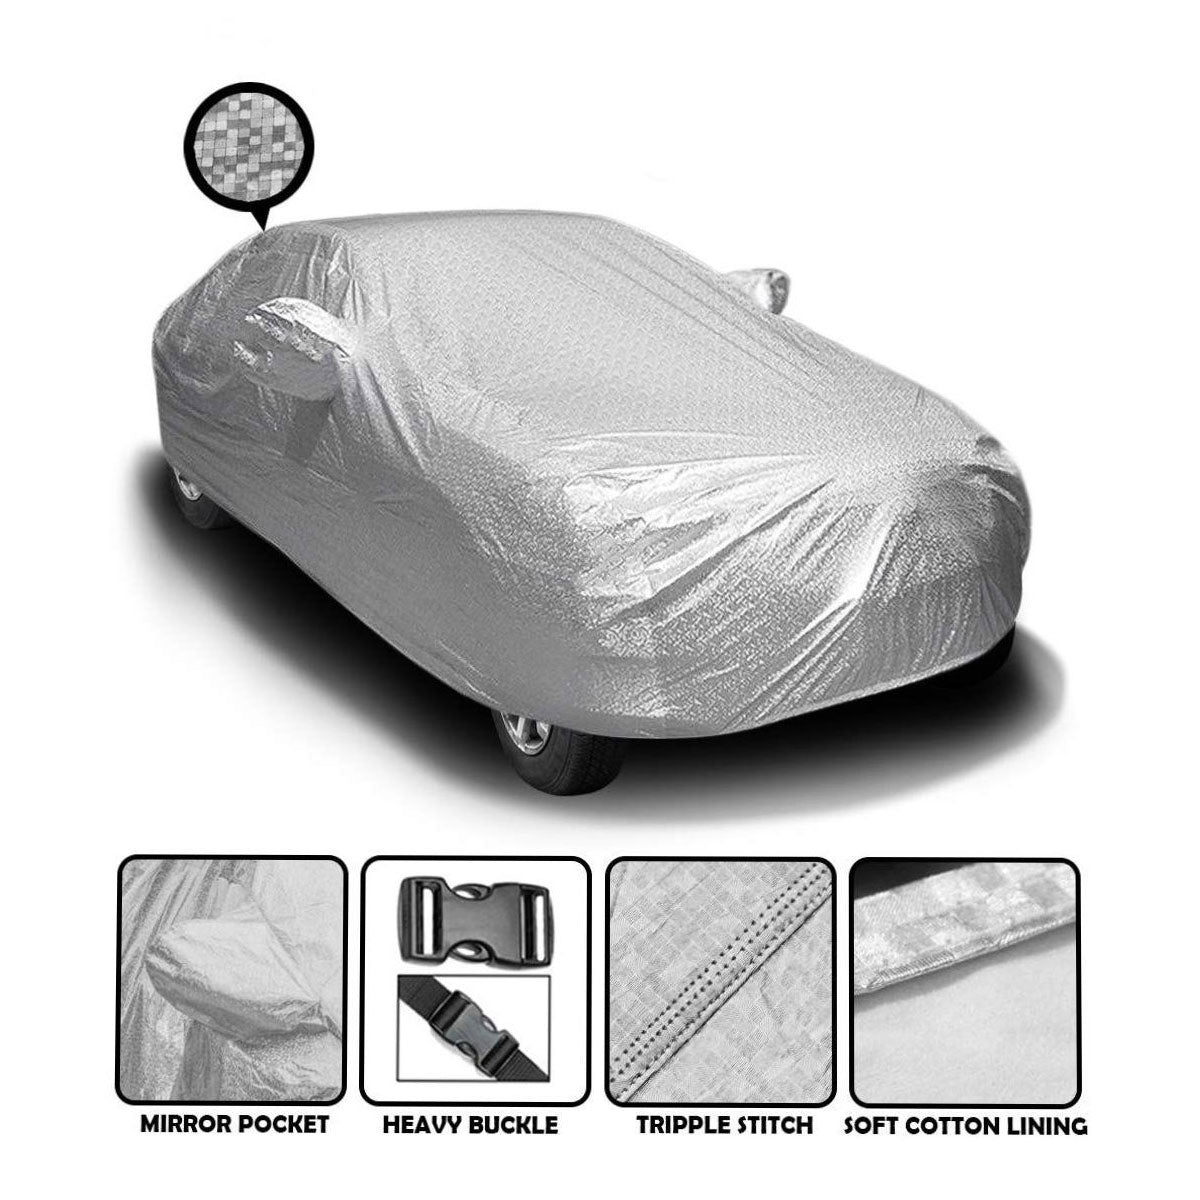 Oshotto Spyro Silver Anti Reflective, dustproof and Water Proof Car Body Cover with Mirror Pockets For Nissan Sunny